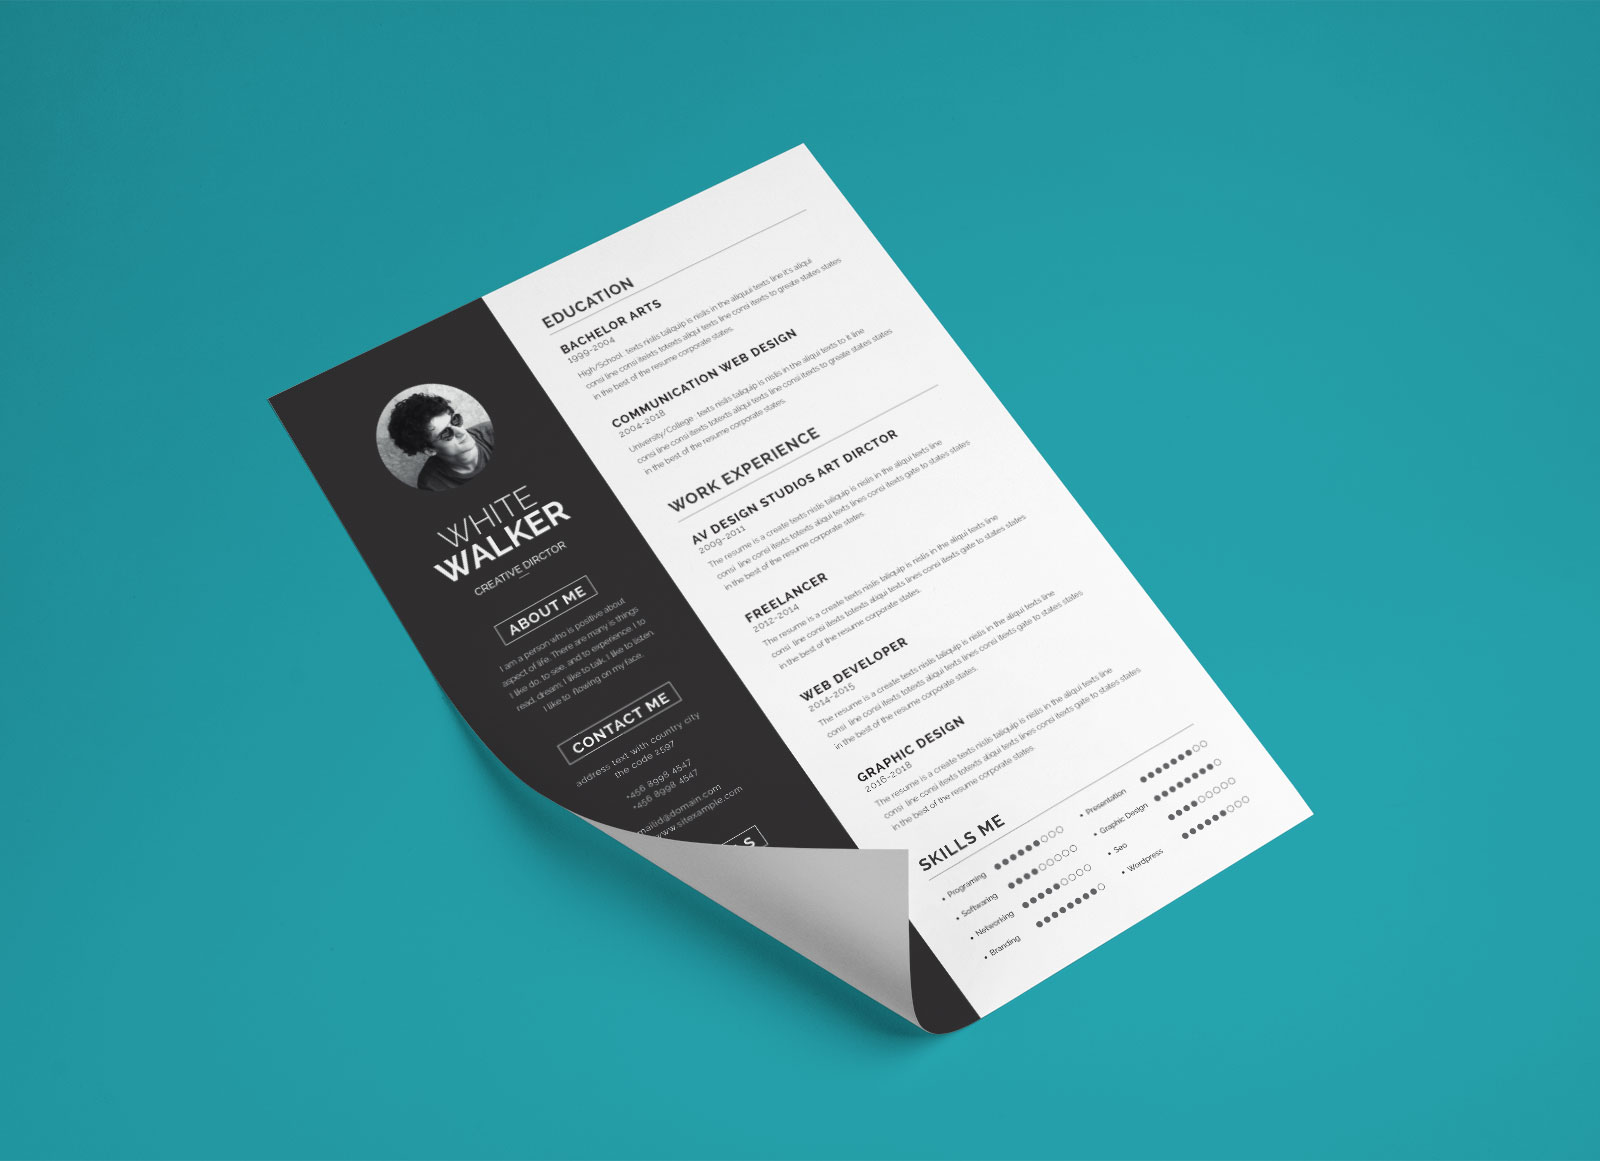 Free-Clean-Resume-Template-&-Cover-Letter-in-Word-PSD-PPTX-&-EPS- (2)